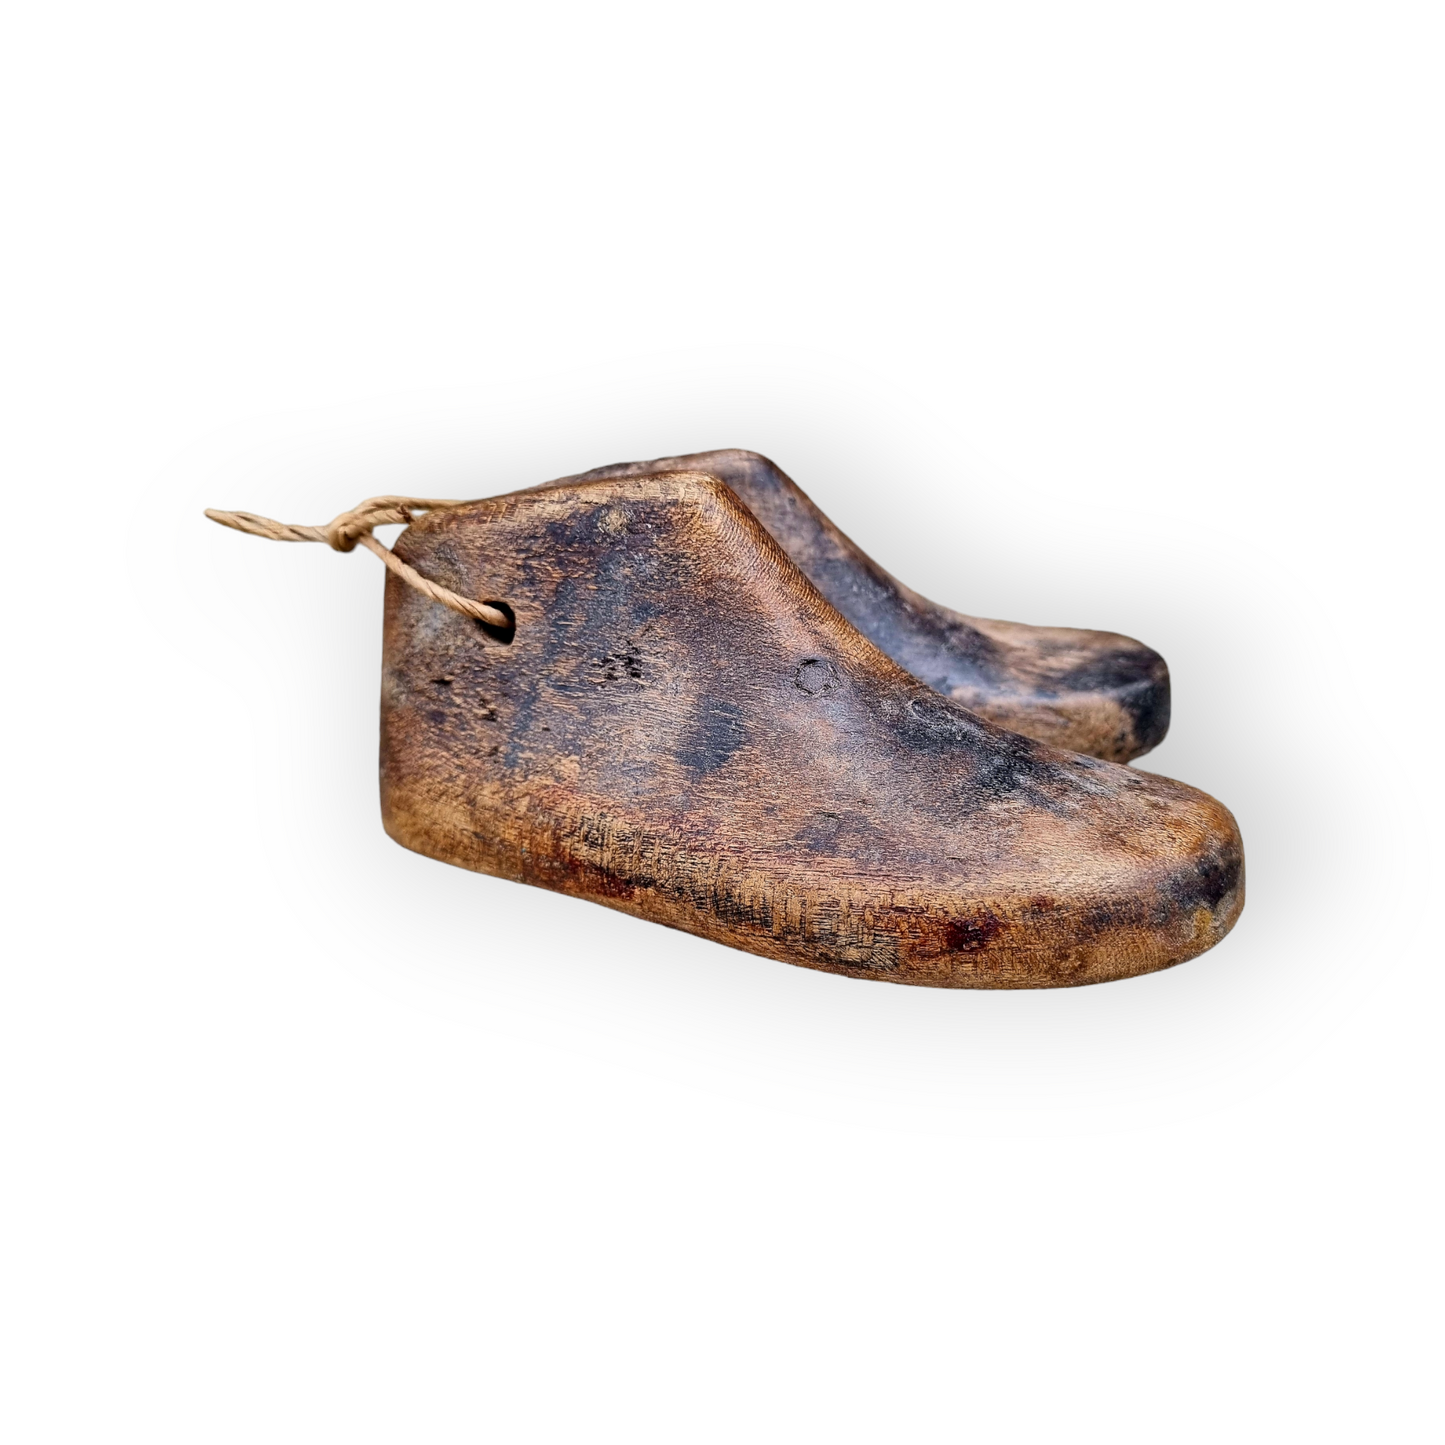 Pair of Early 19th Century English Antique Treen Shoemaker's Miniature Child's Shoe Lasts